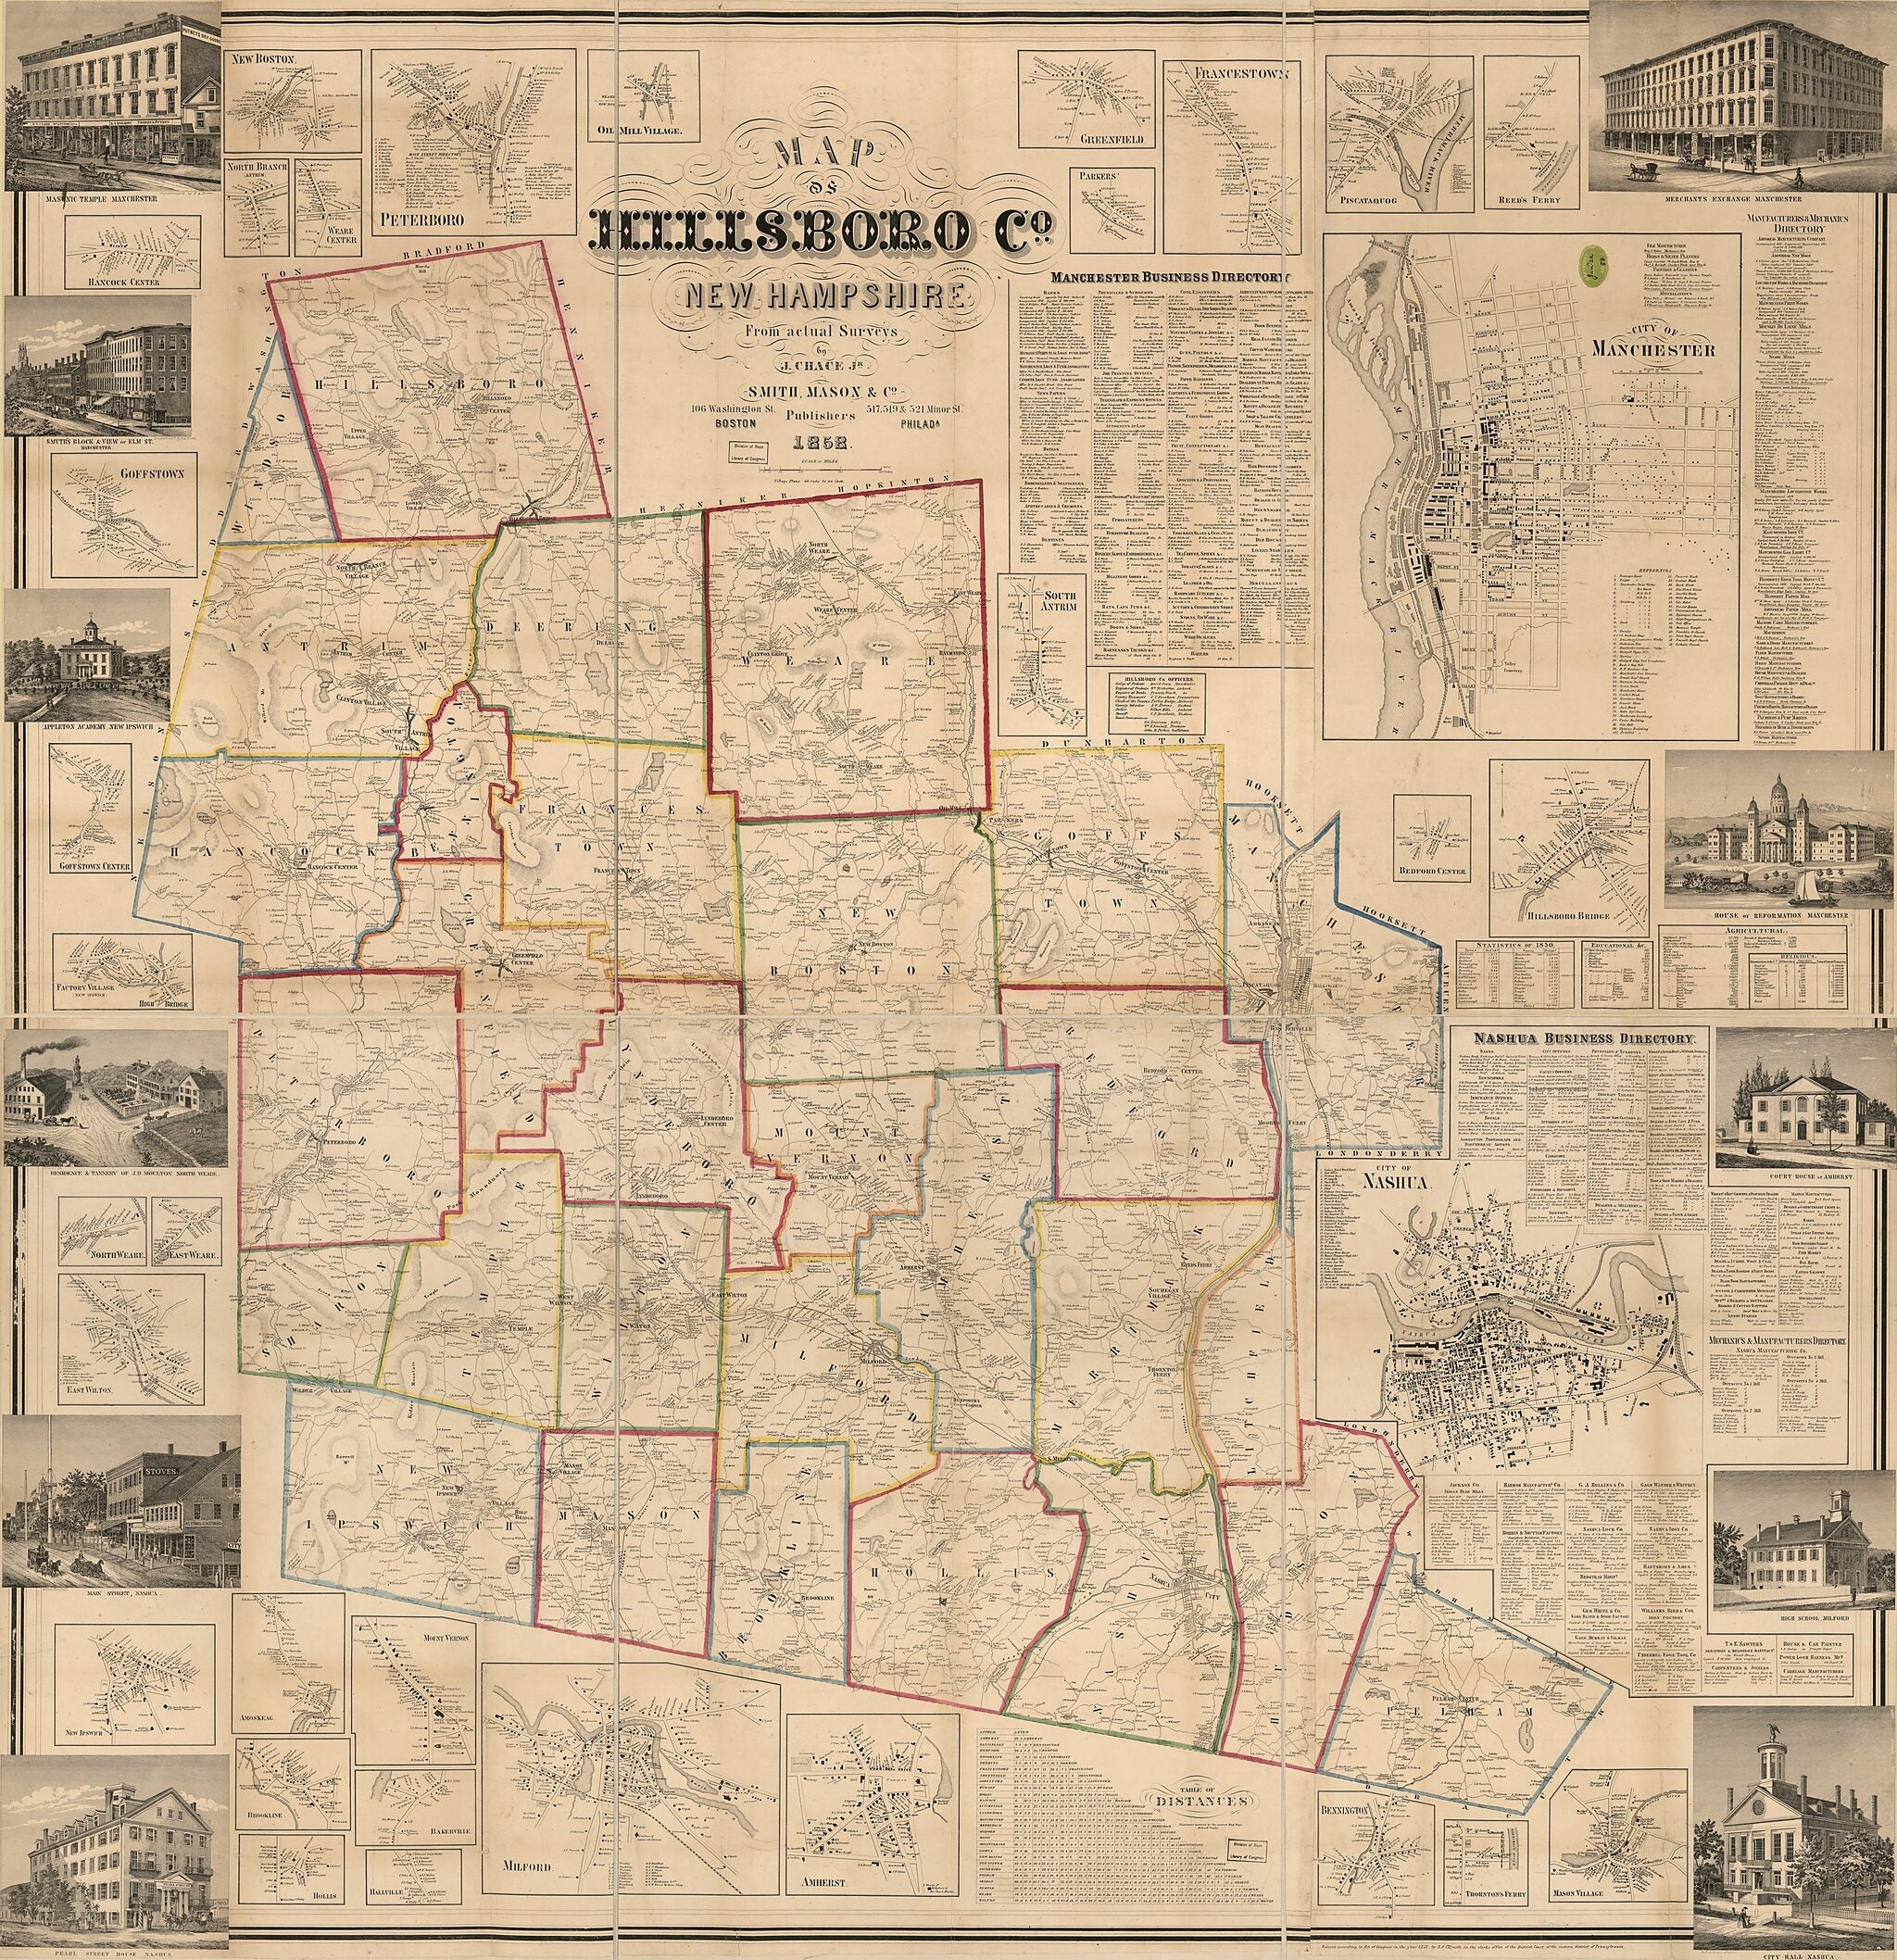 This old map of Map of Hillsboro County, New Hampshire (Map of Hillsboro County, New Hampshire) from 1858 was created by J. Chace, Mason &amp; Co Smith in 1858